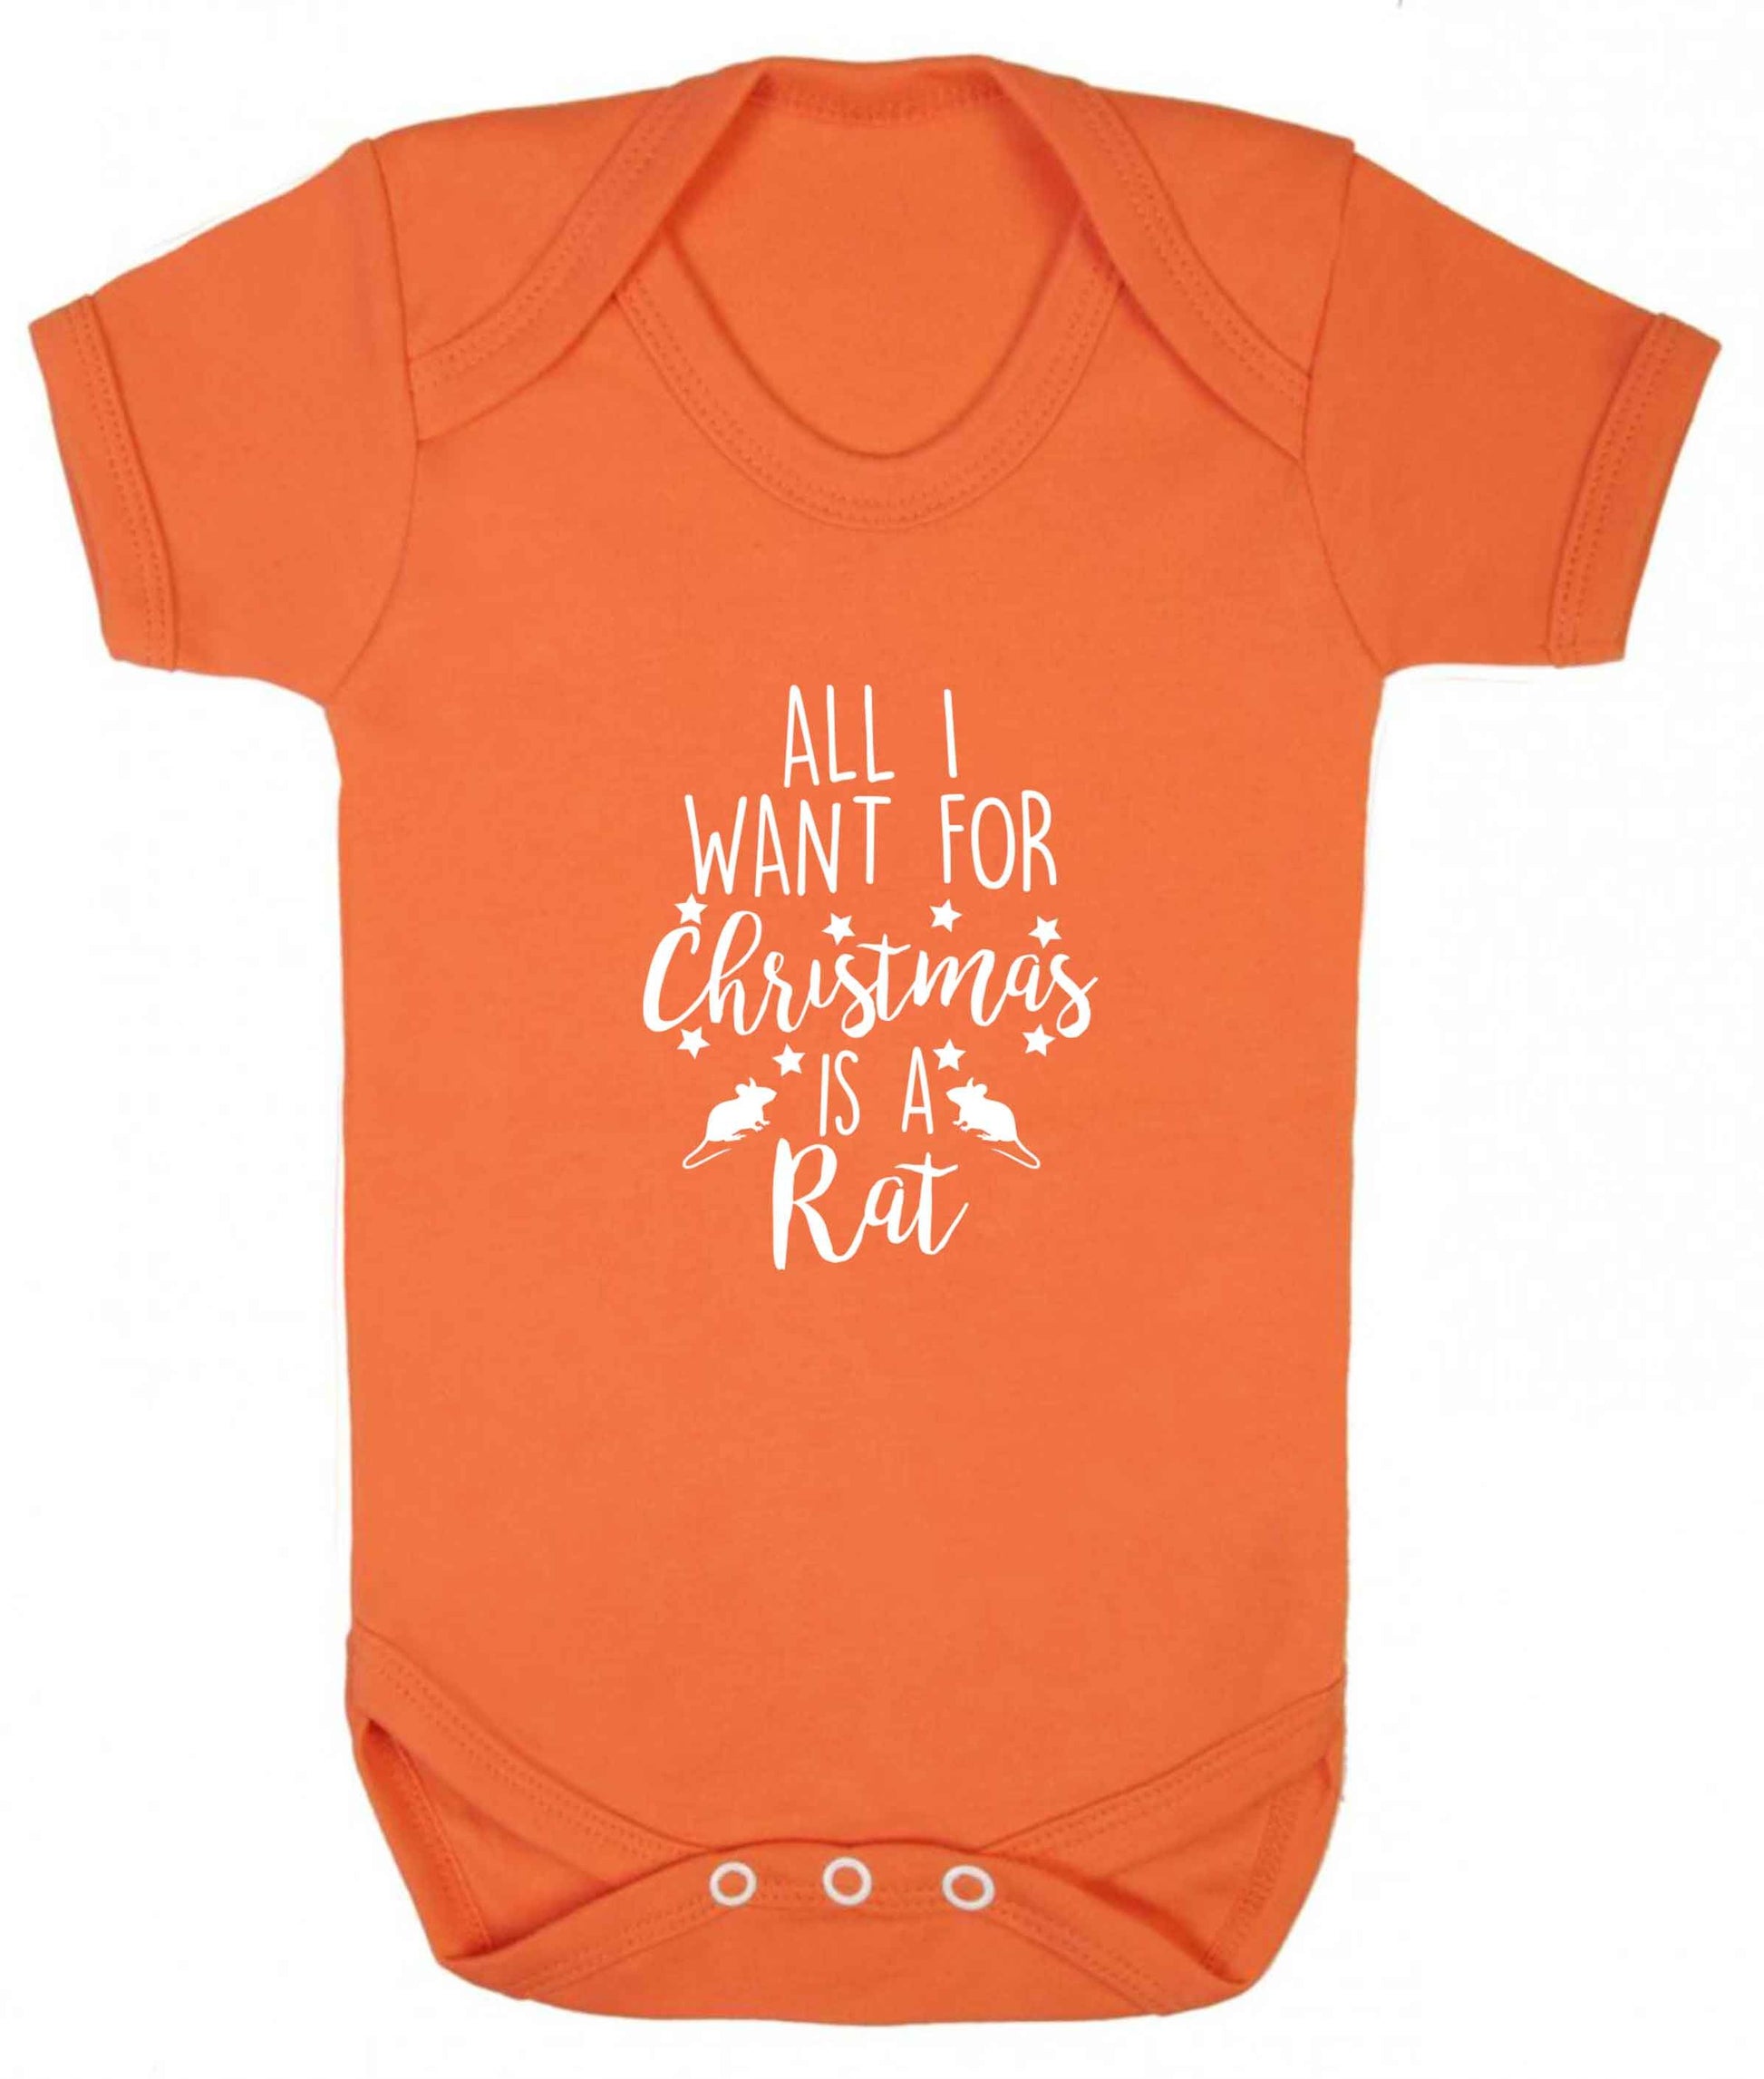 All I want for Christmas is a rat baby vest orange 18-24 months